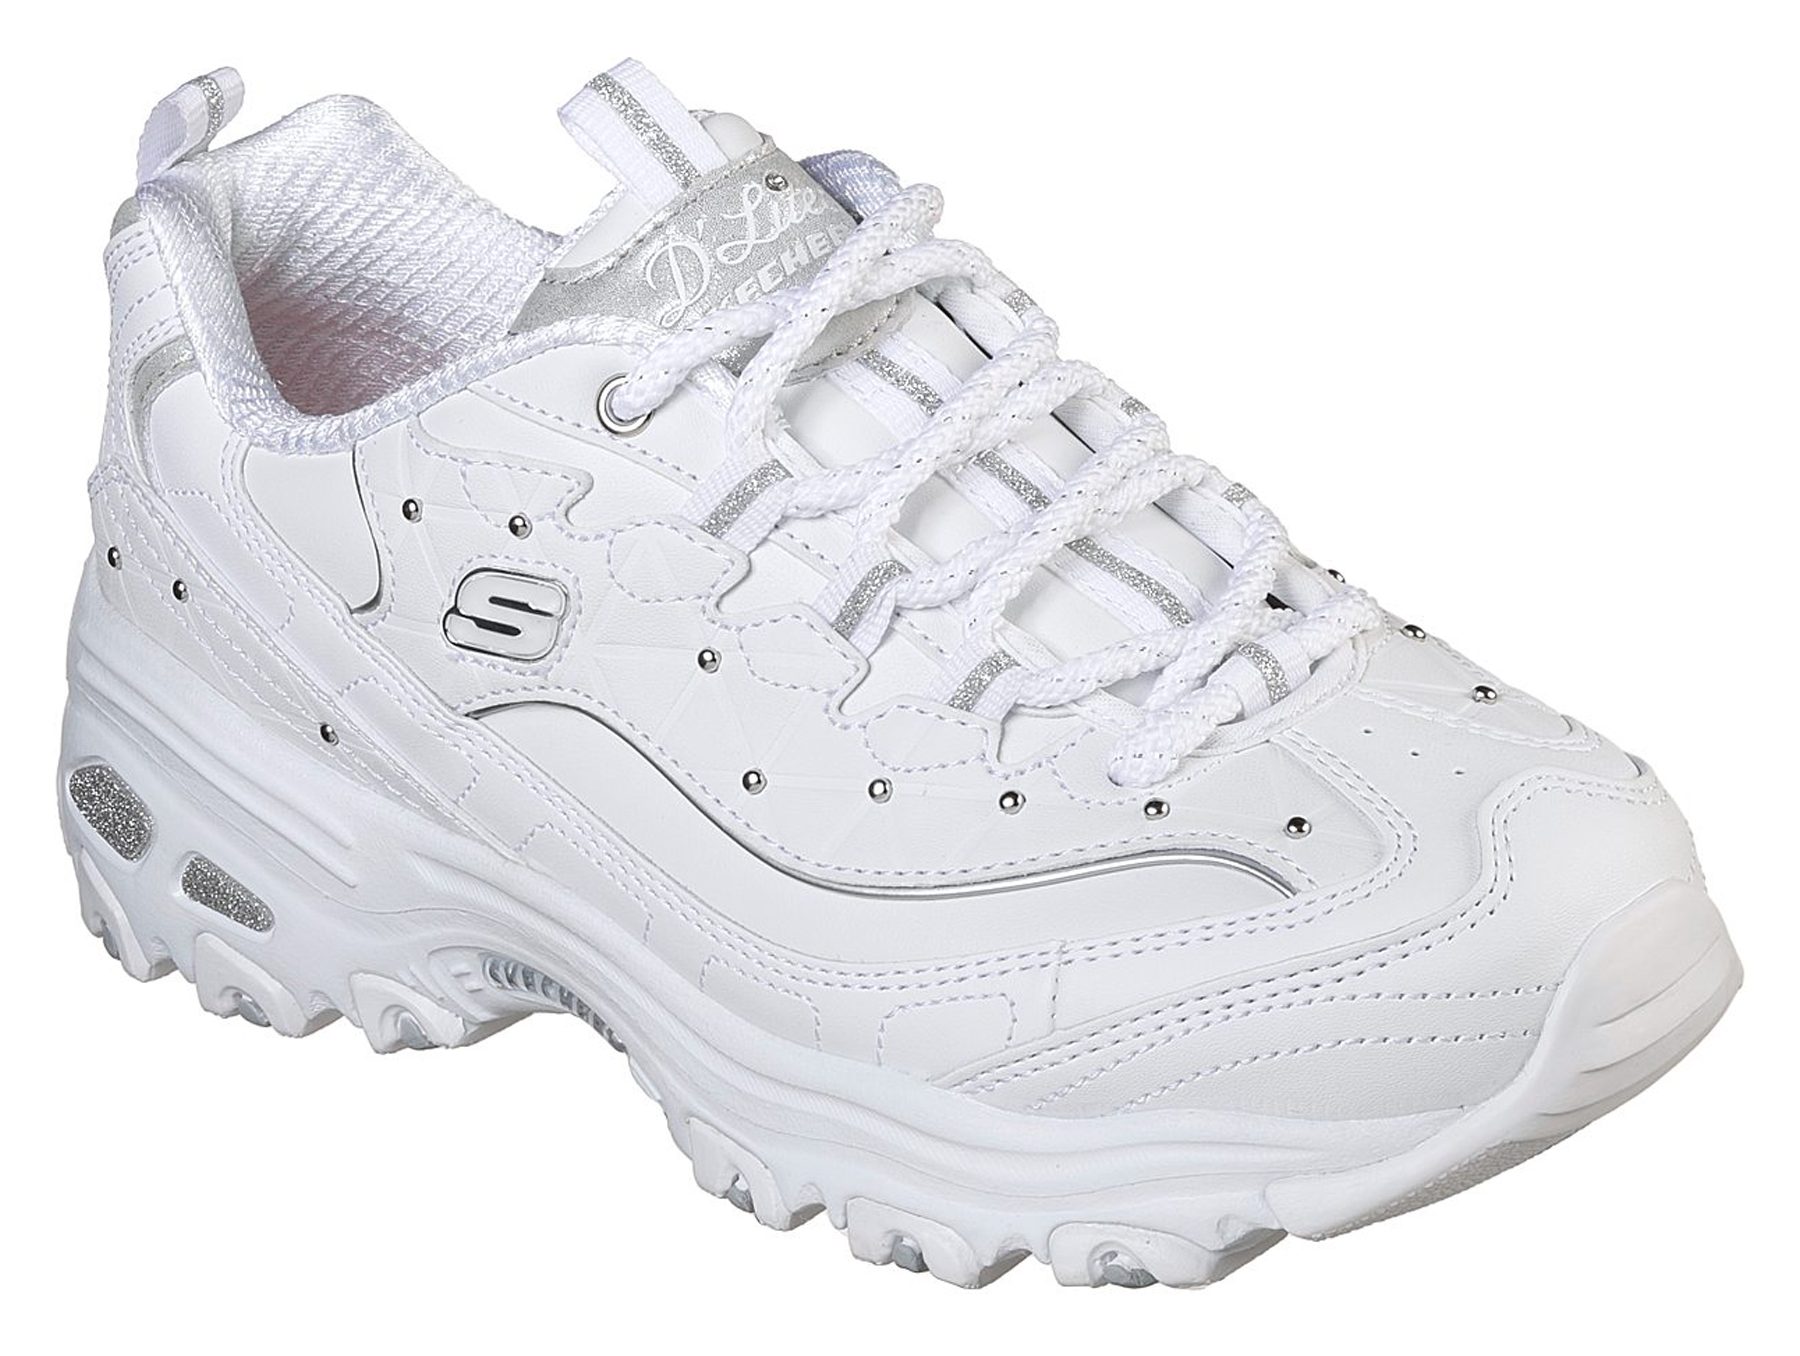 Skechers D'Lites - Glamour Feels White / Silver 13087 WSL - Everyday Shoes  - Humphries Shoes